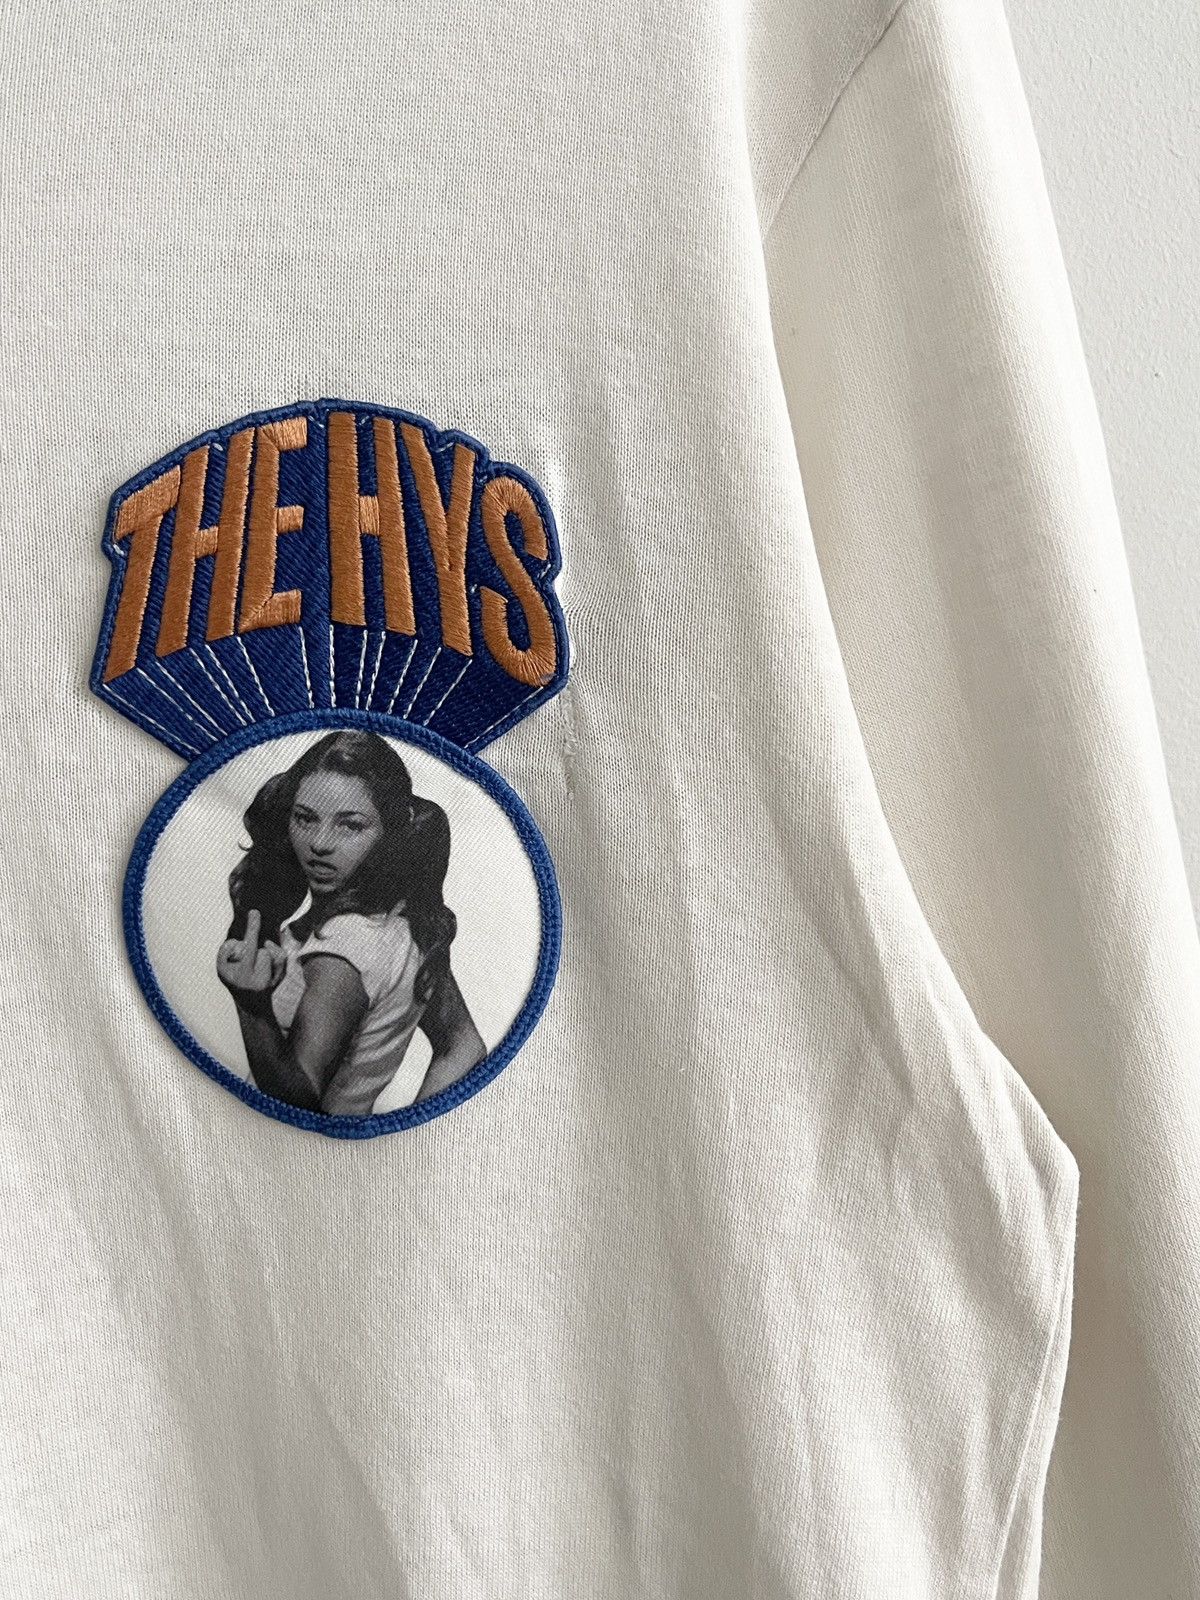 STEAL! 1990s Hysteric Glamour NY Knicks Cheerleader LS Tee - 4